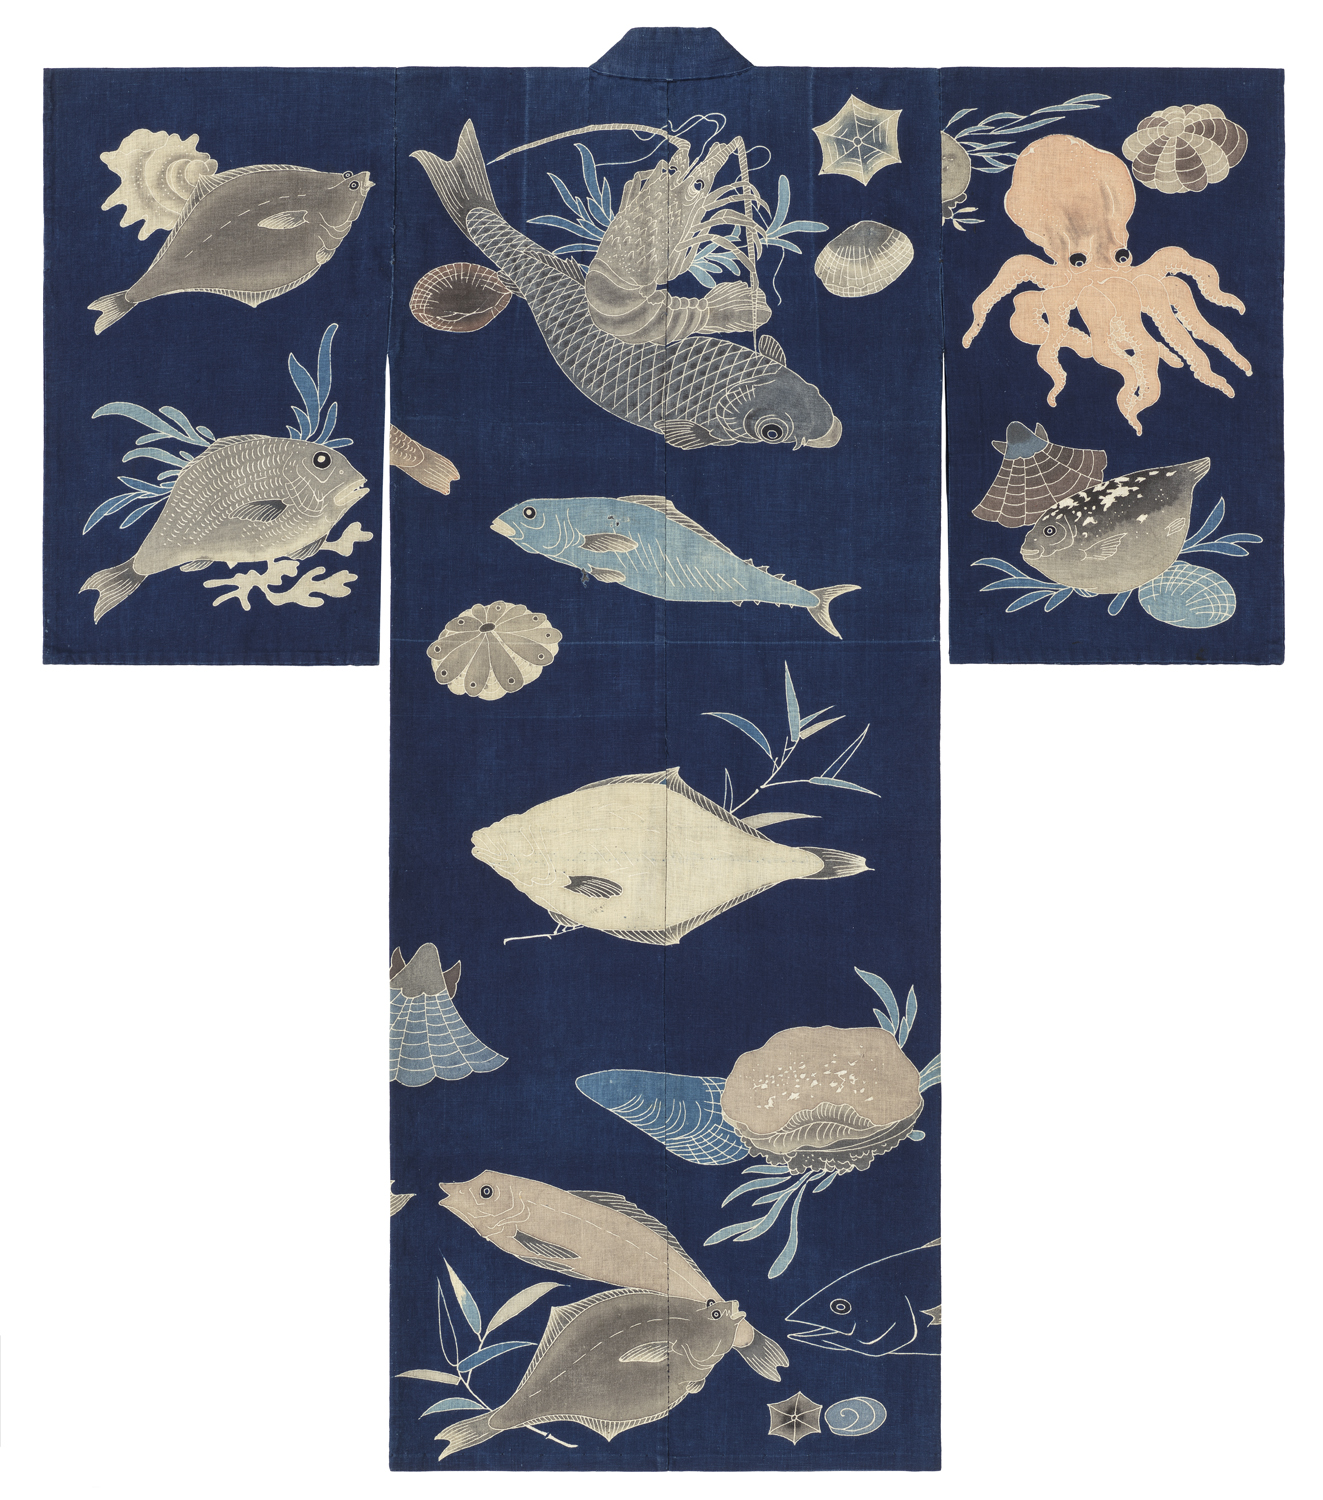 Japan, early 20th century, Dark blue-ground festival kimono decorated with sea creatures (back), cloth: cotton; tsutsugaki (freehand resist). The John R. Van Derlip Fund and the Mary Griggs Burke Endowment Fund established by the Mary Livingston Griggs and Mary Griggs Burke Foundation; purchase from the Thomas Murray Collection 2019.20.62 